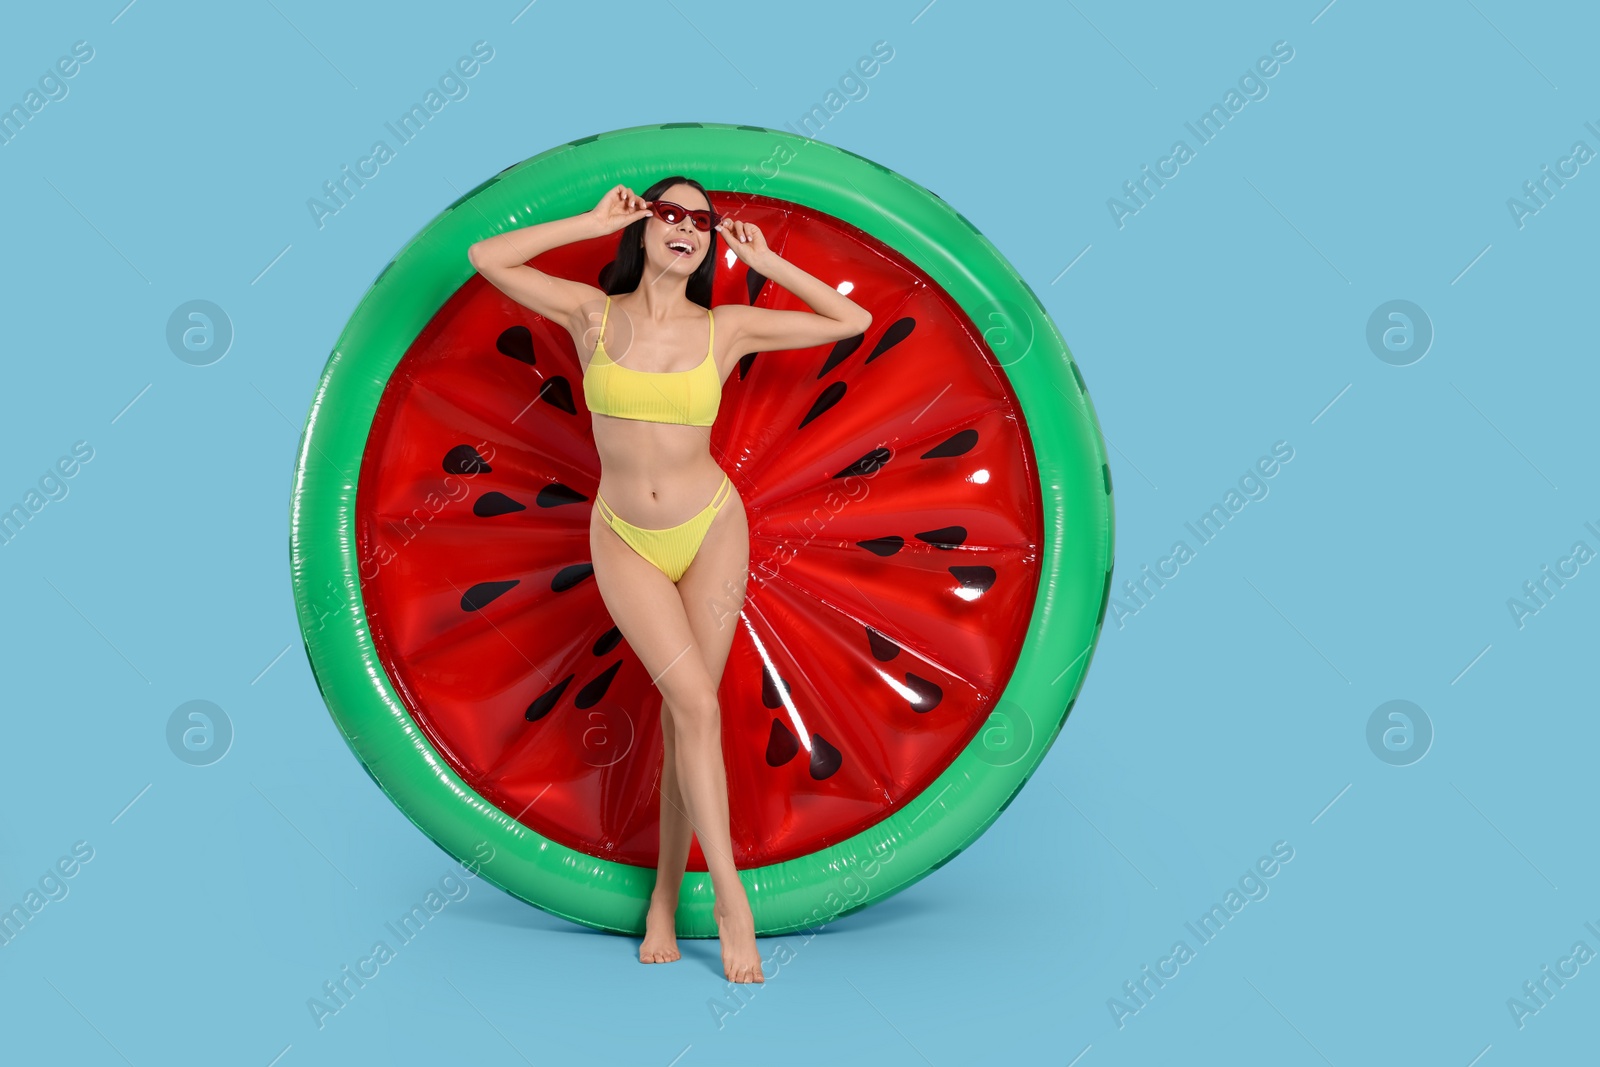 Photo of Young woman in stylish swimsuit near inflatable mattress against light blue background